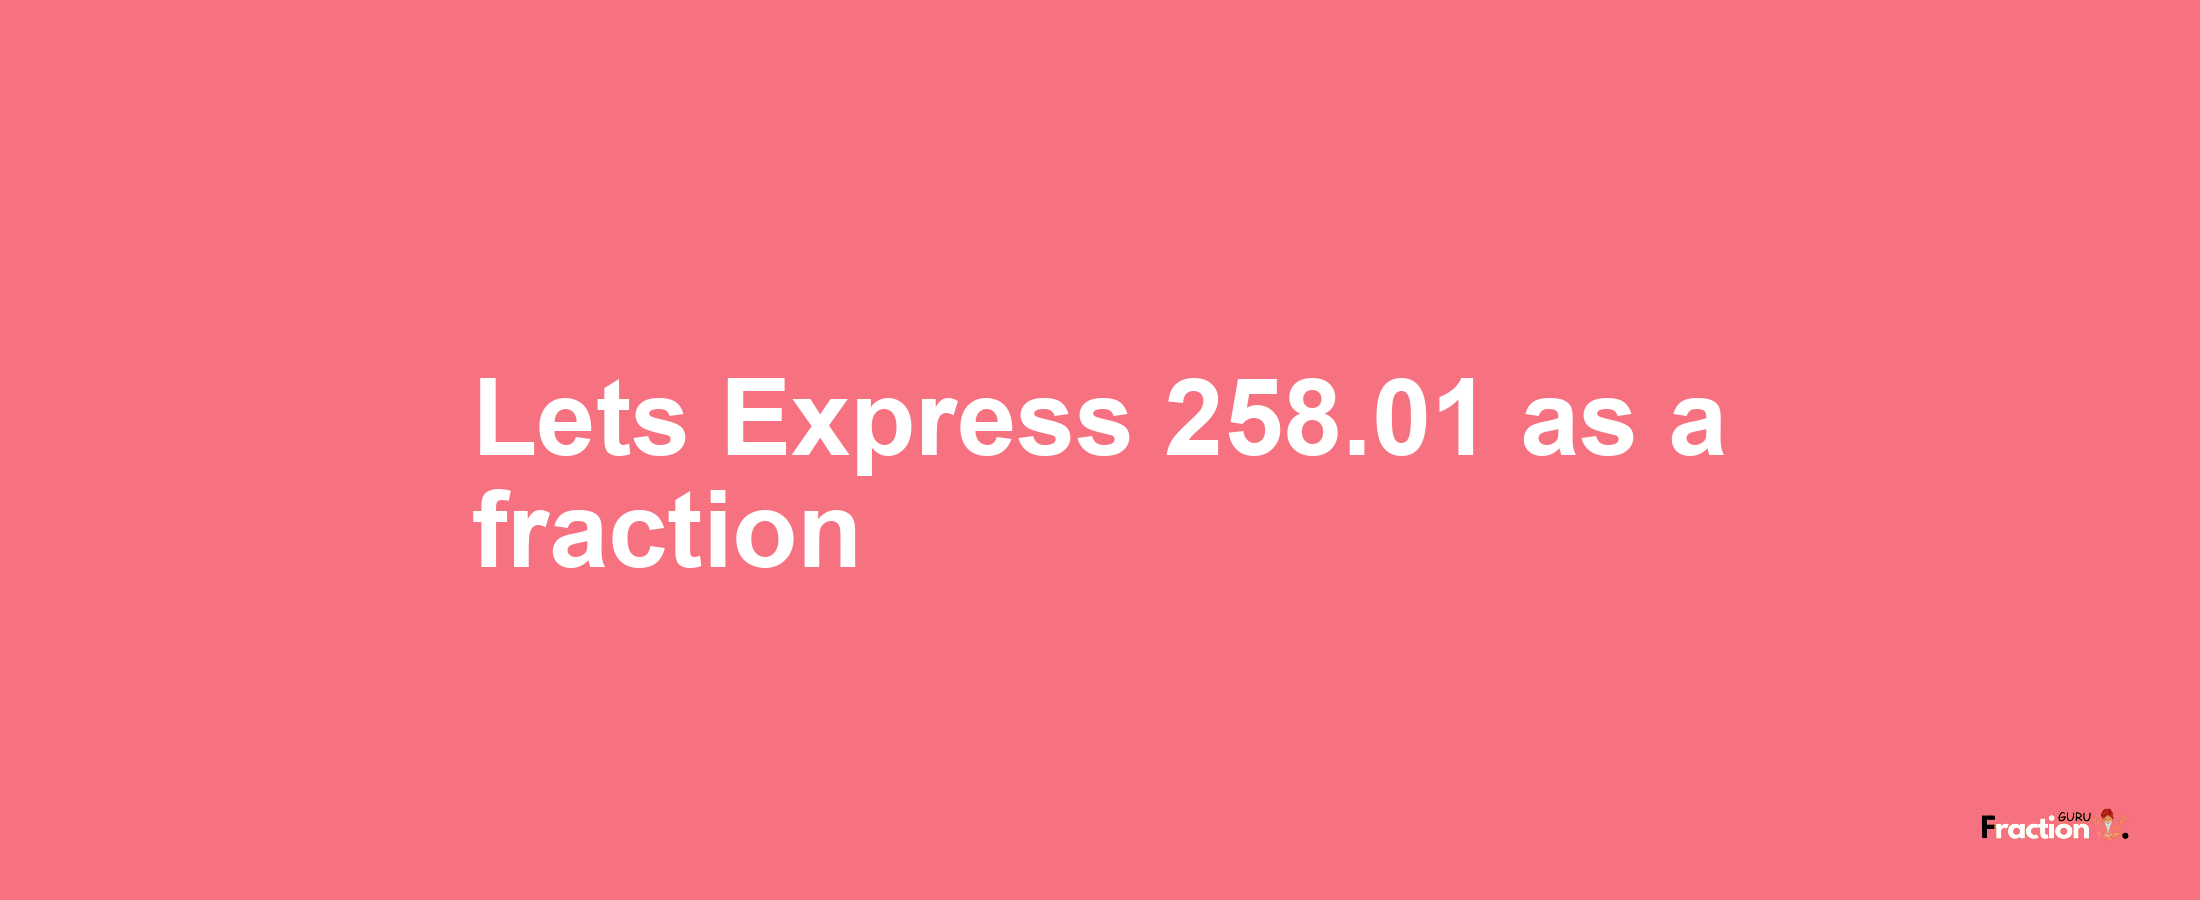 Lets Express 258.01 as afraction